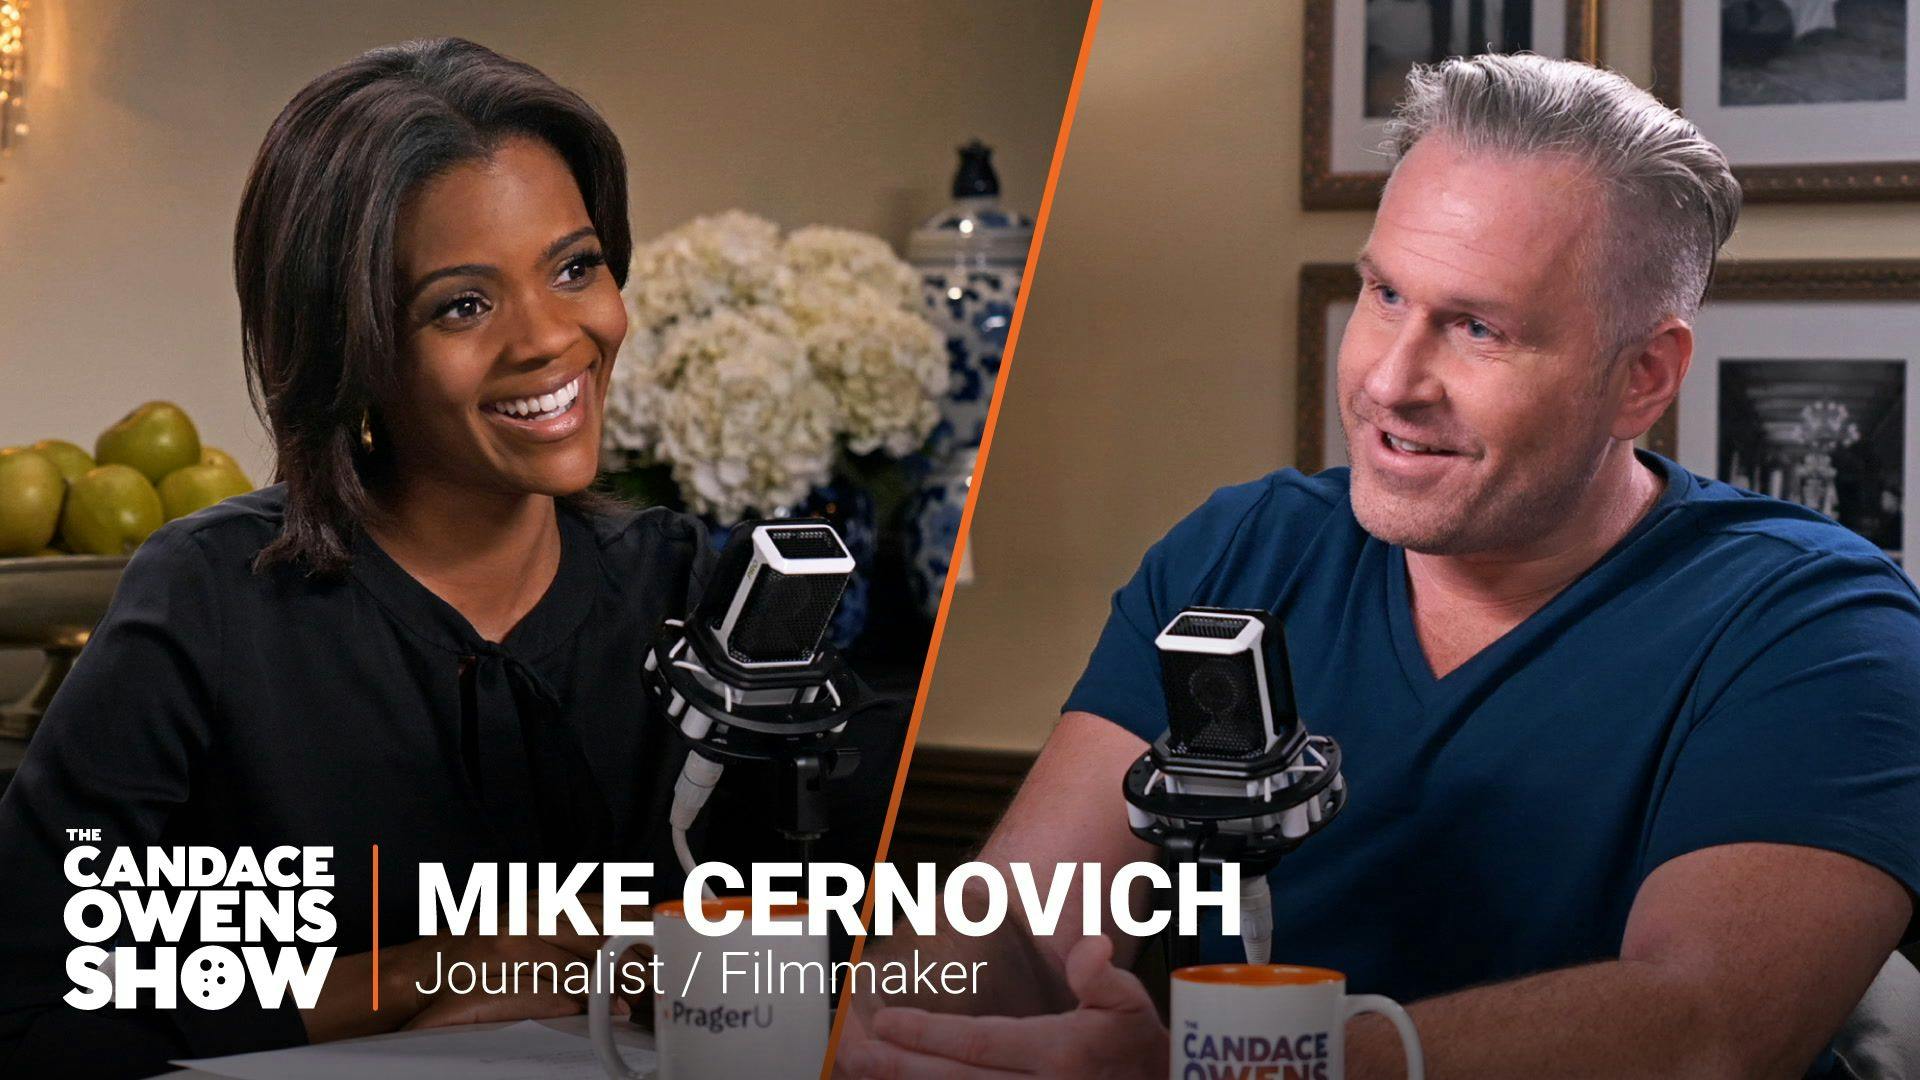 The Candace Owens Show: Mike Cernovich